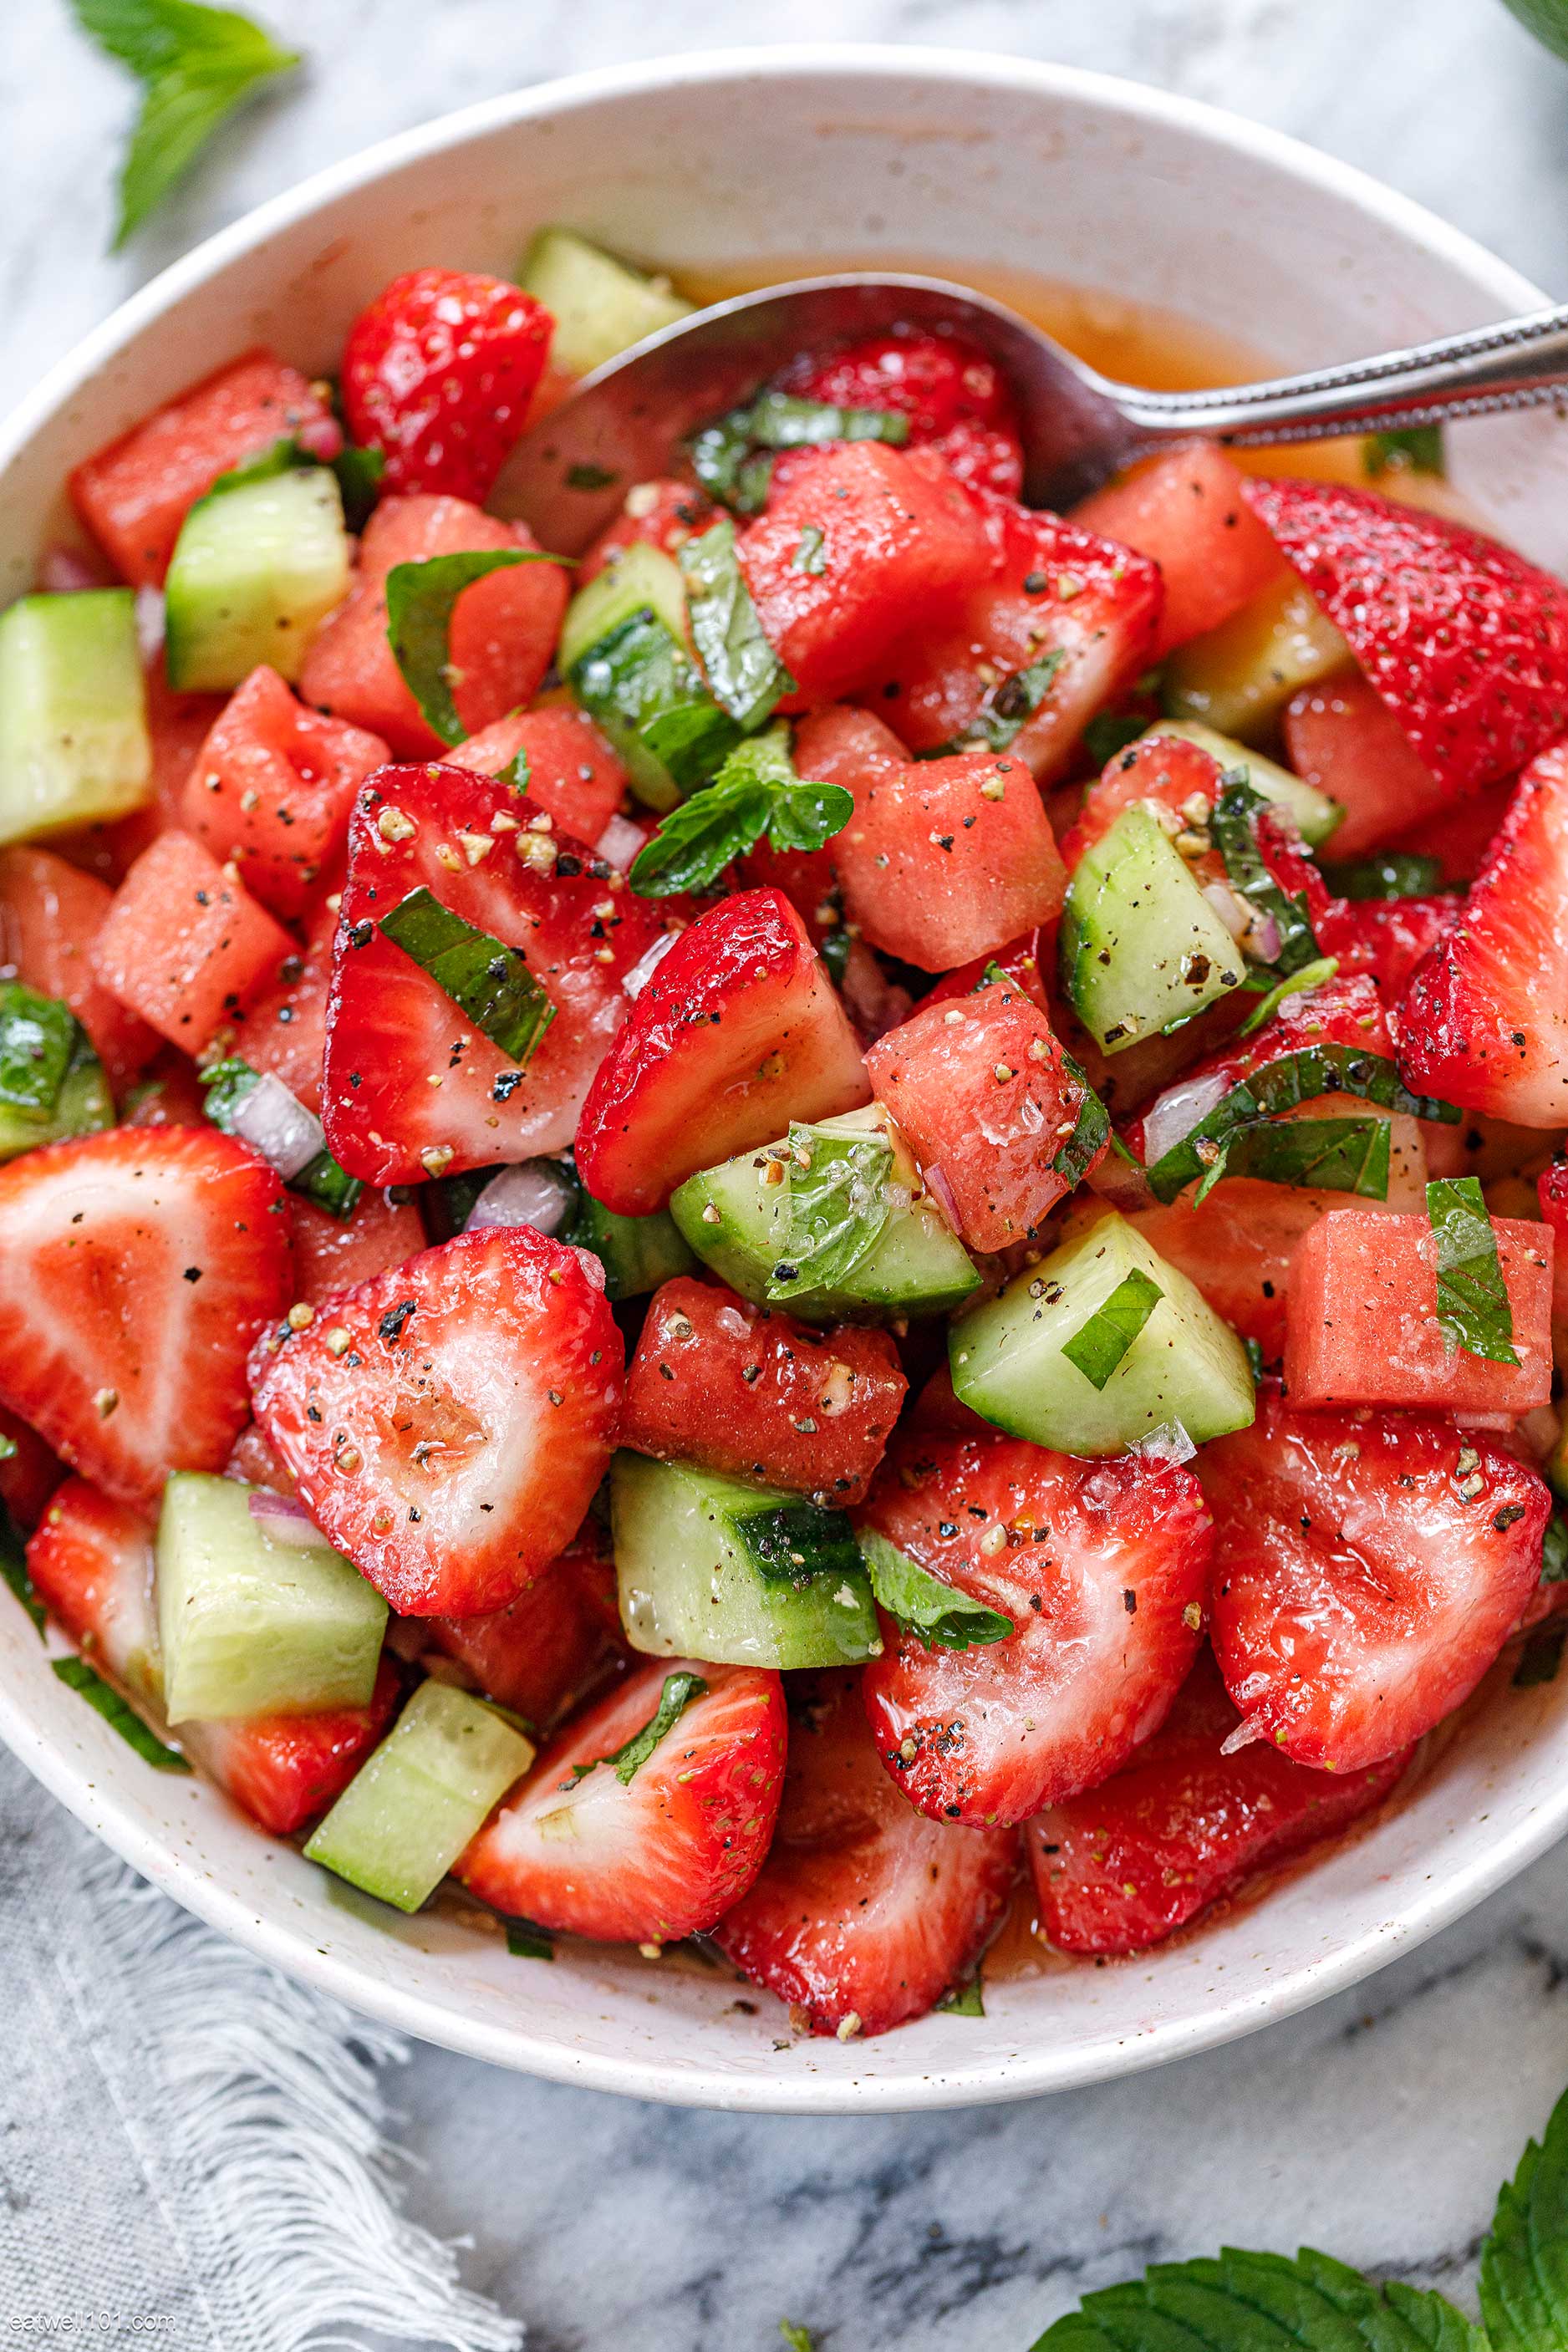 Watermelon Salad Recipe with Strawberry and Cucumber